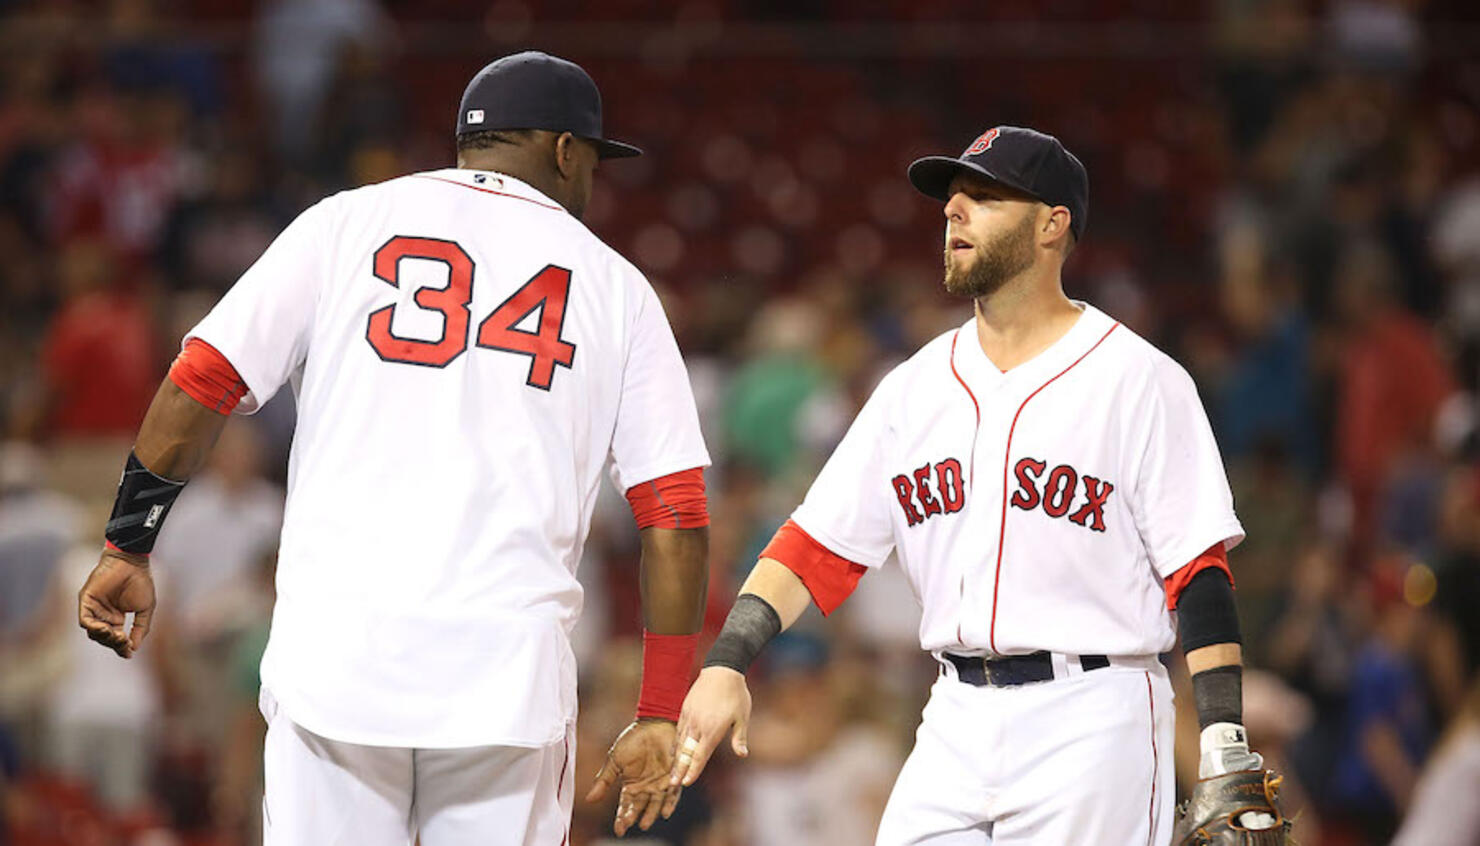 Dustin Pedroia To Be Inducted Into To Red Sox Hall Of Fame's 2022 Class